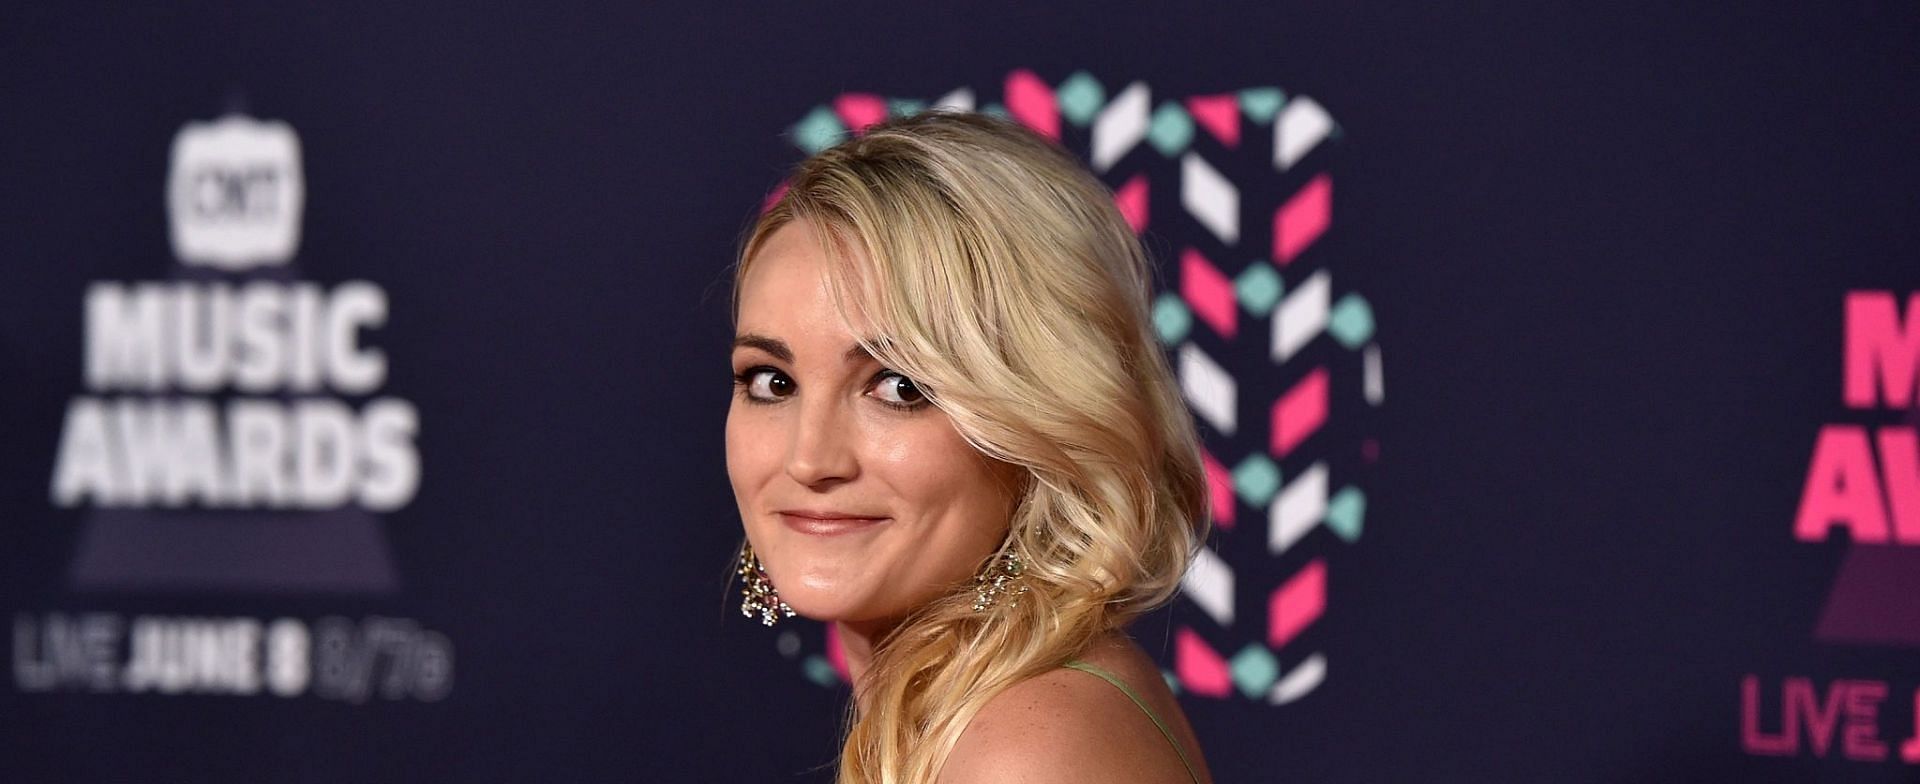 Jamie Lynn Spears recently opened up about her teen pregnancy (Image via John Shearer/WireImage)